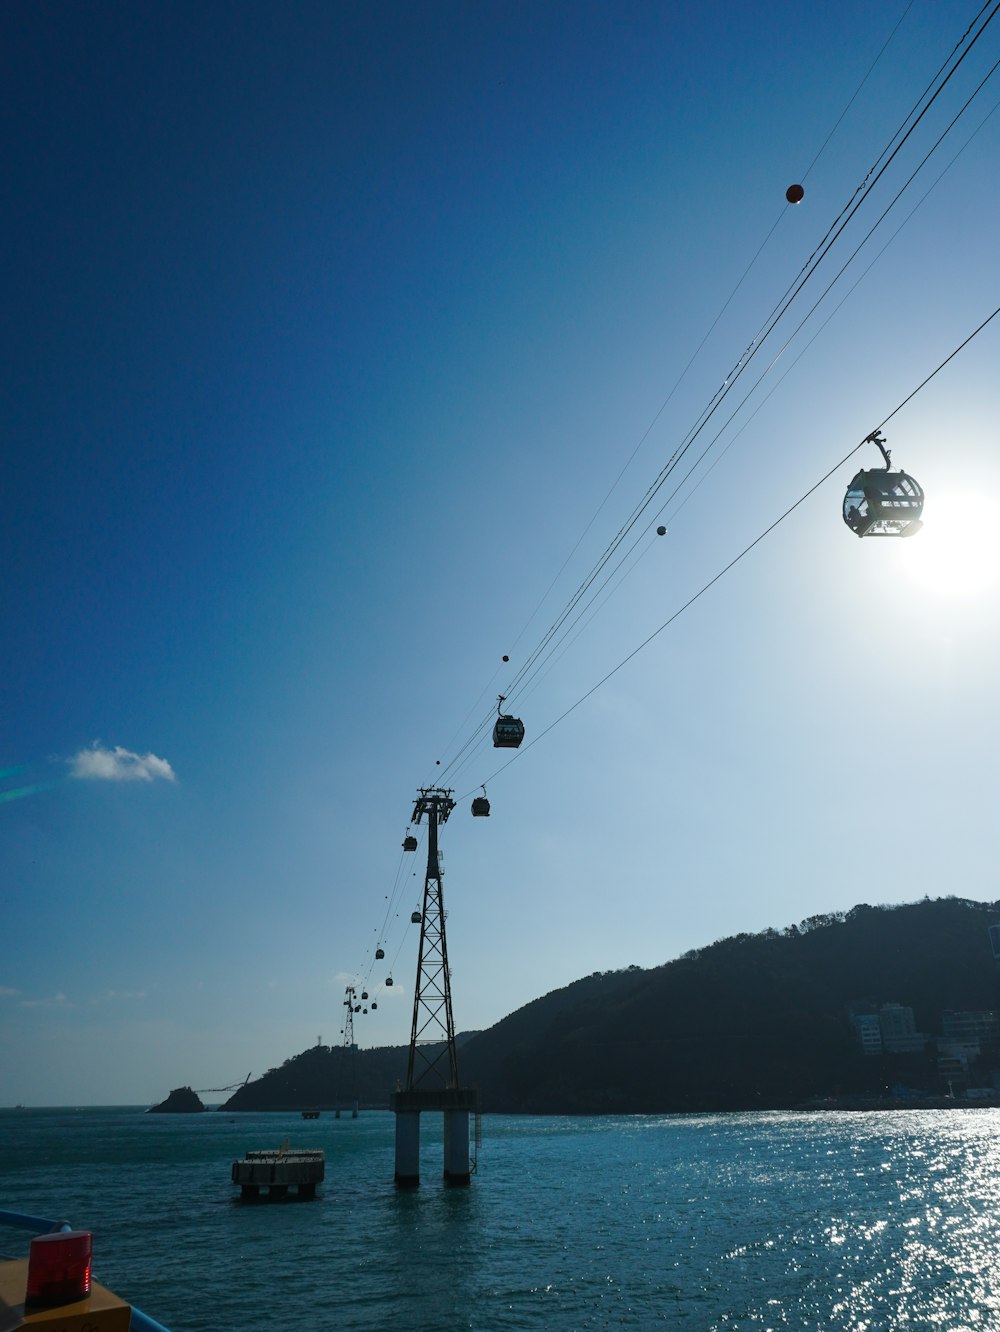 the sun is shining over the water and a cable car